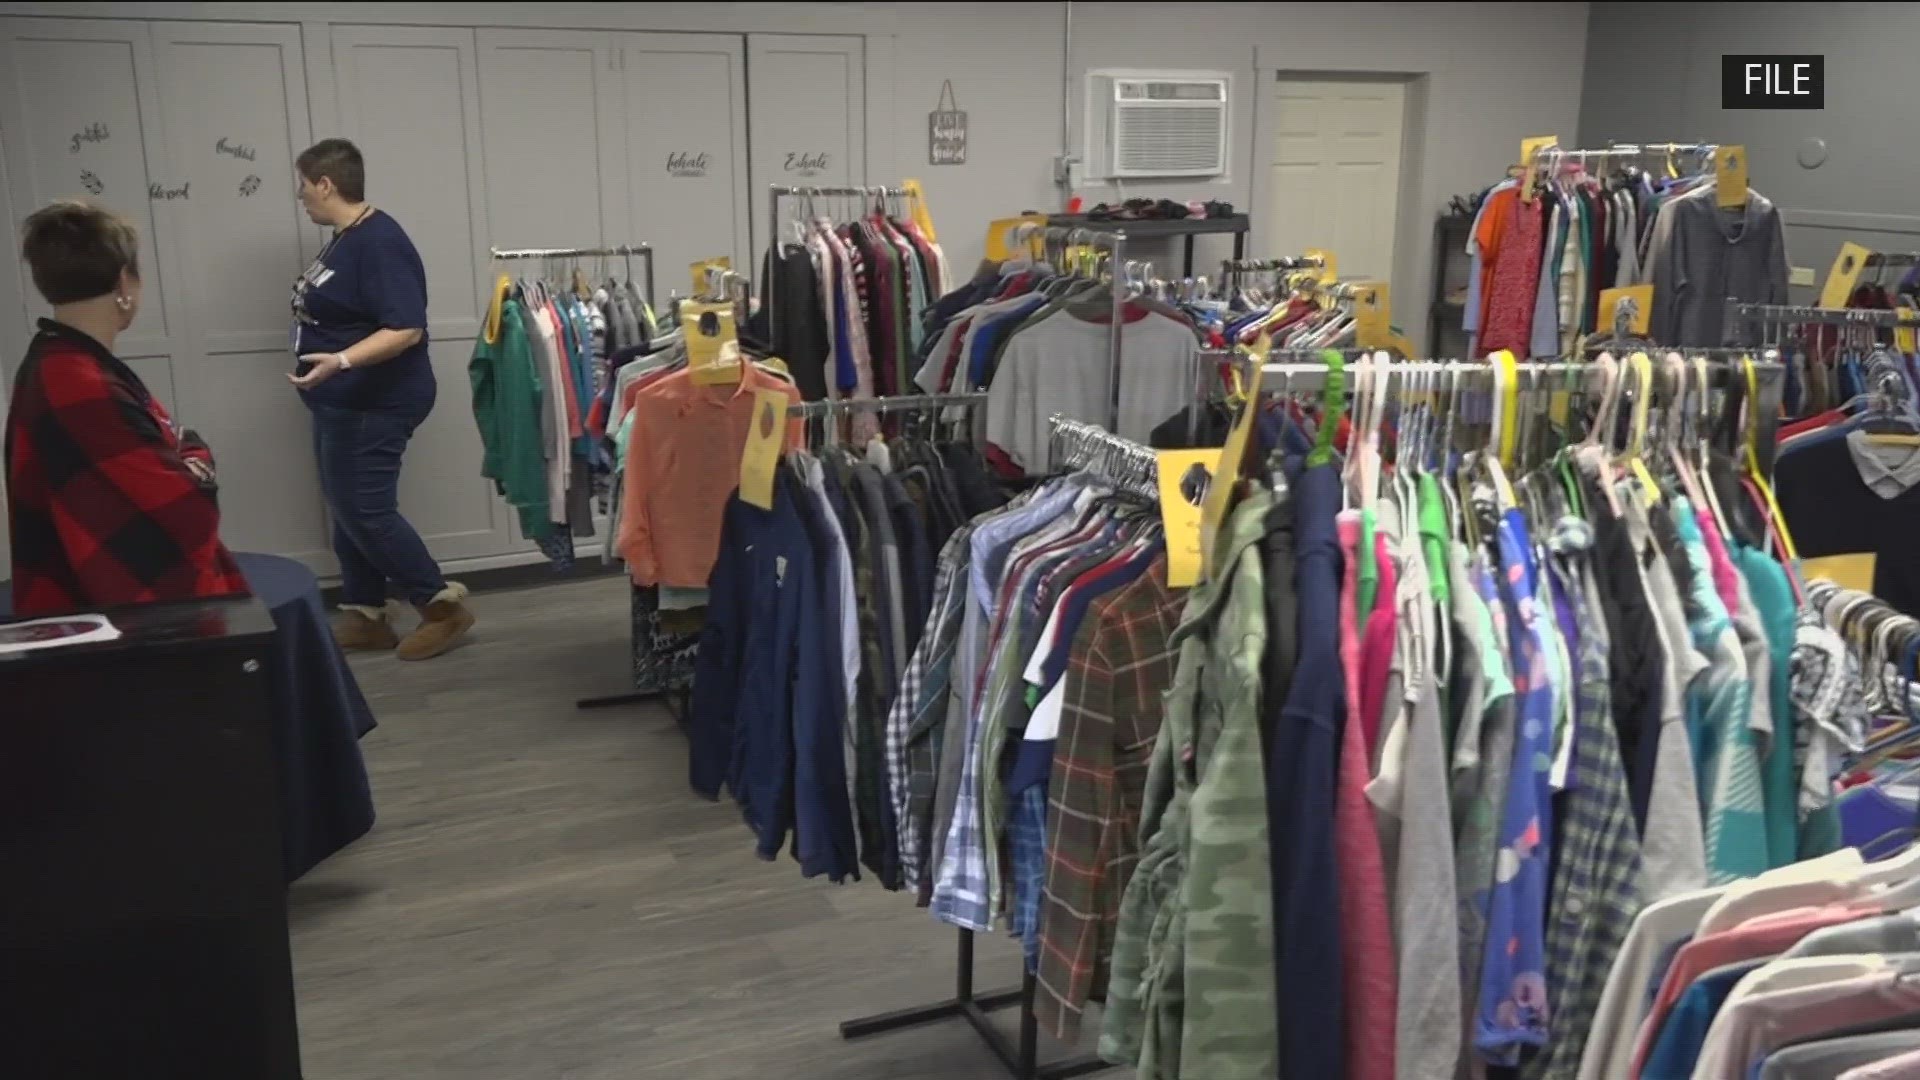 The School Clothing program, which is in its fourth year, offers eligible families a $225 voucher for new clothes twice a year.